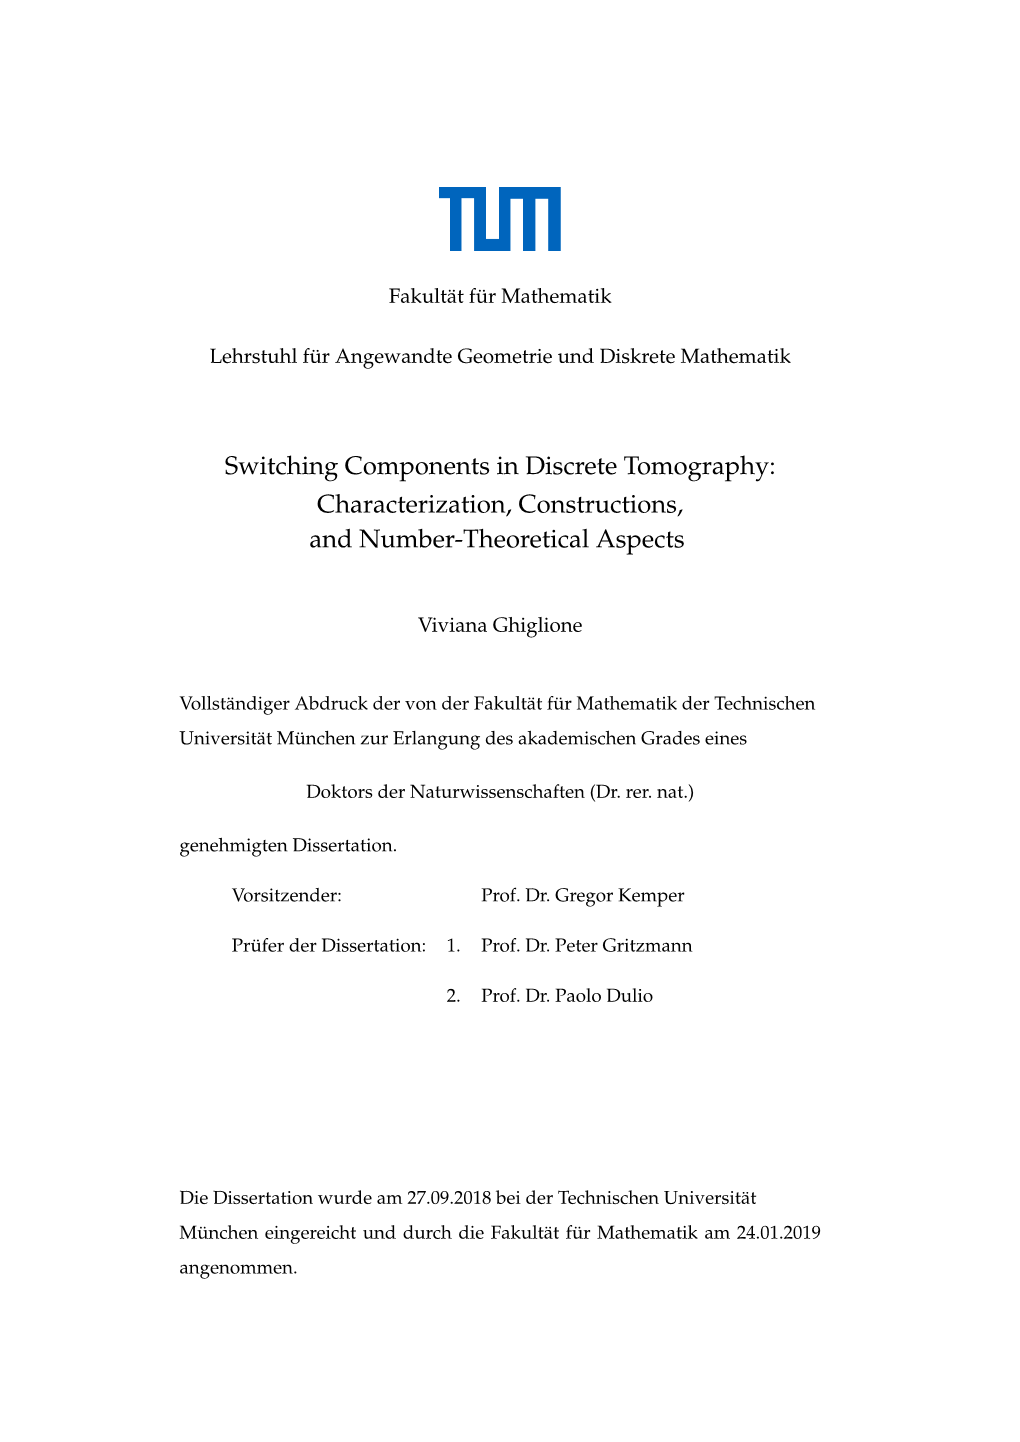 Switching Components in Discrete Tomography: Characterization, Constructions, and Number-Theoretical Aspects